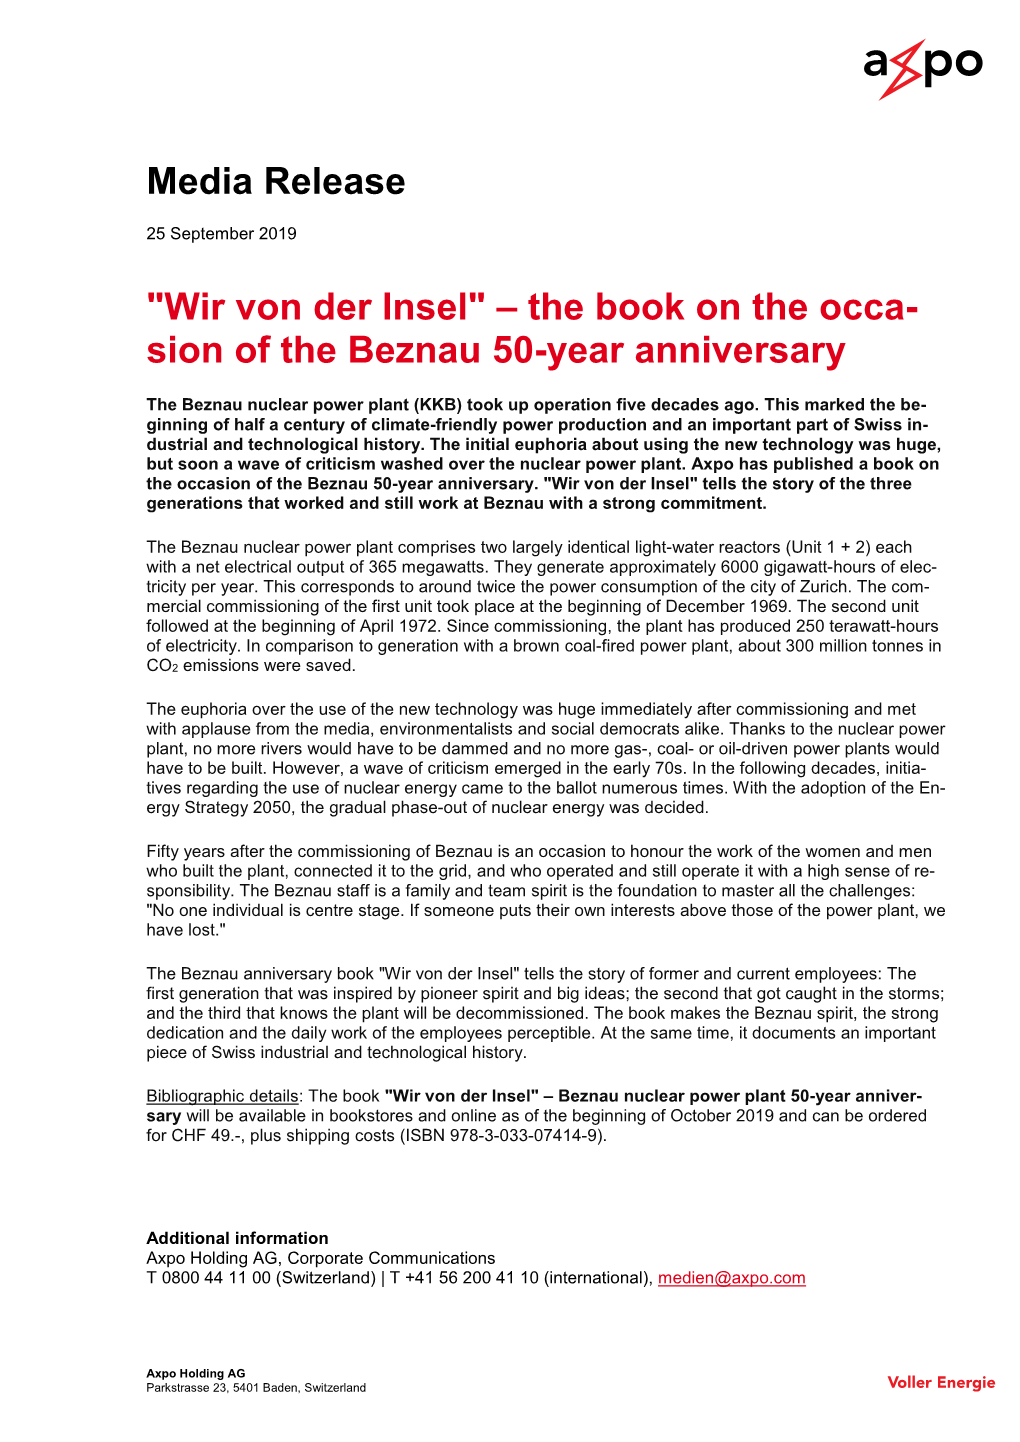 Wir Von Der Insel" – the Book on the Occa- Sion of the Beznau 50-Year Anniversary